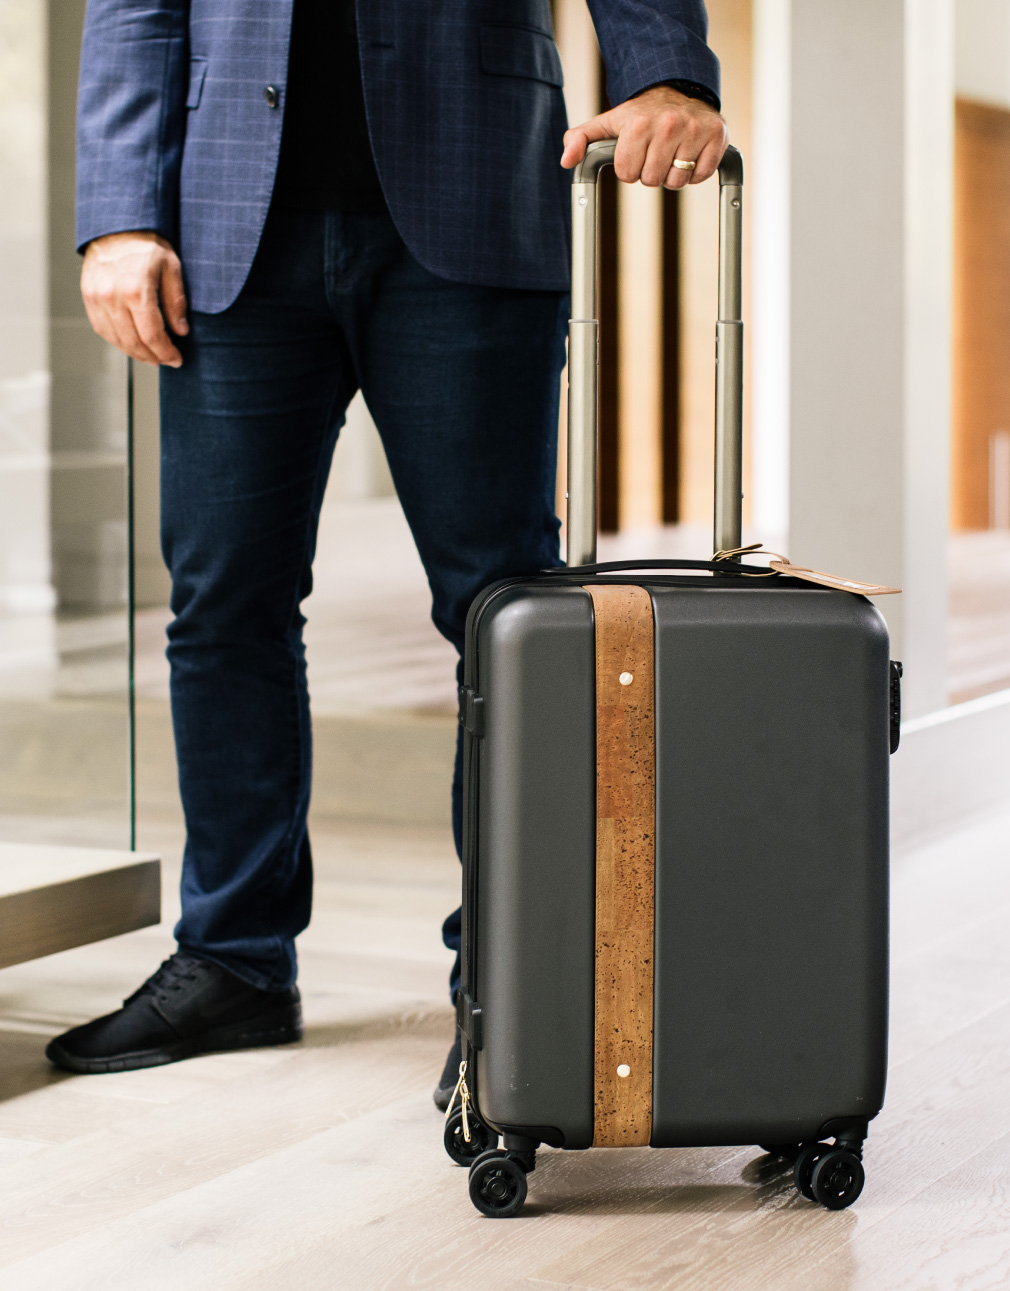 LUXURY CARRY ON LUGGAGE FOR MEN